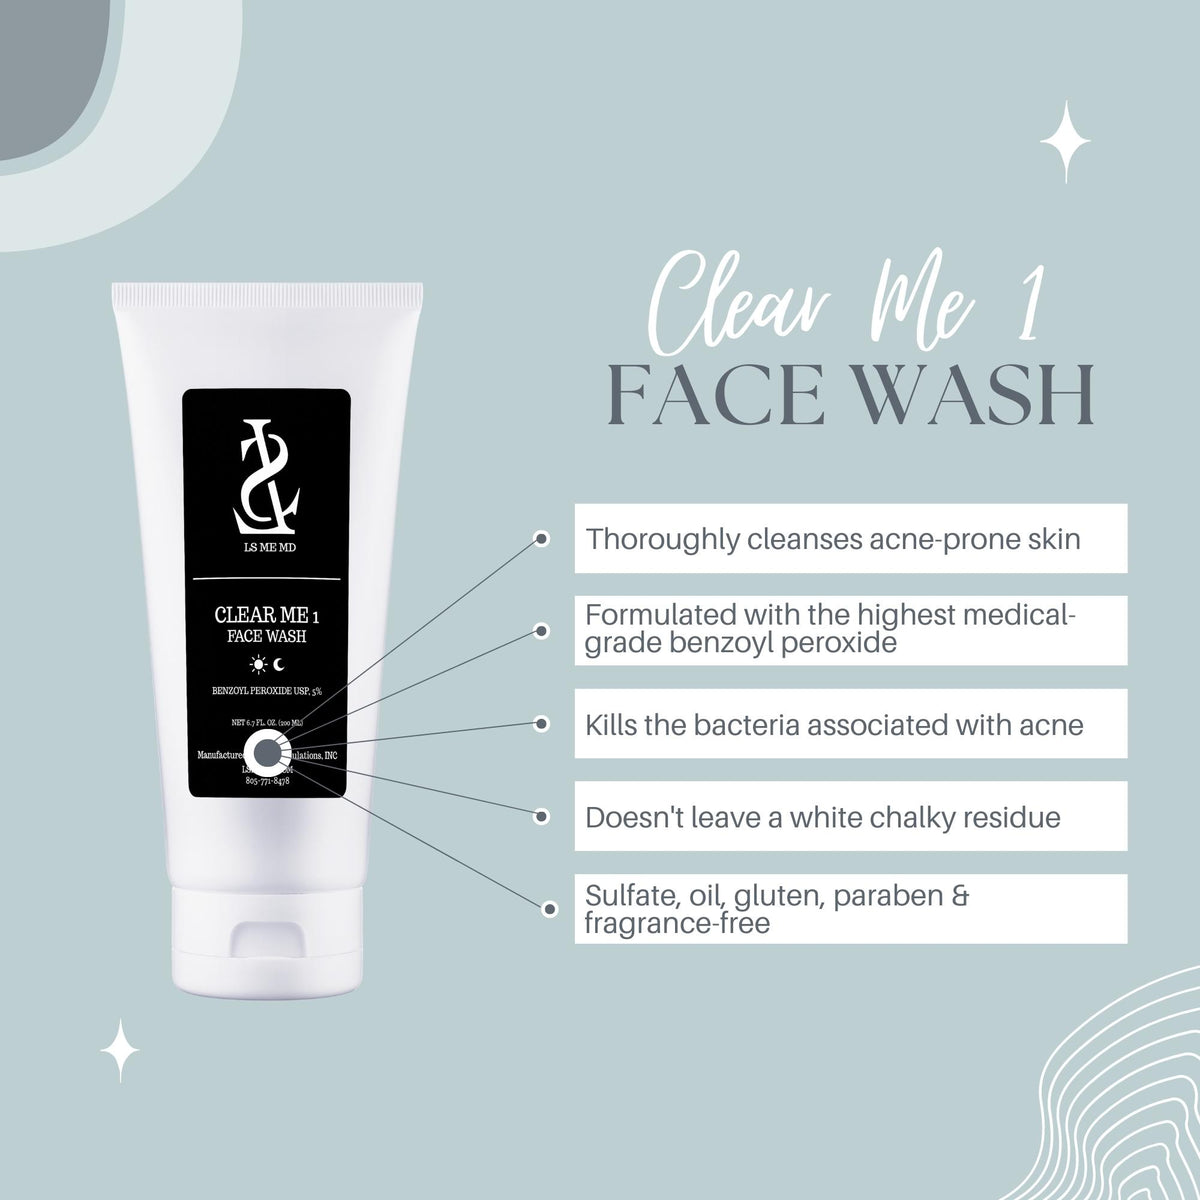 CLEAR ME 1: FACE WASH